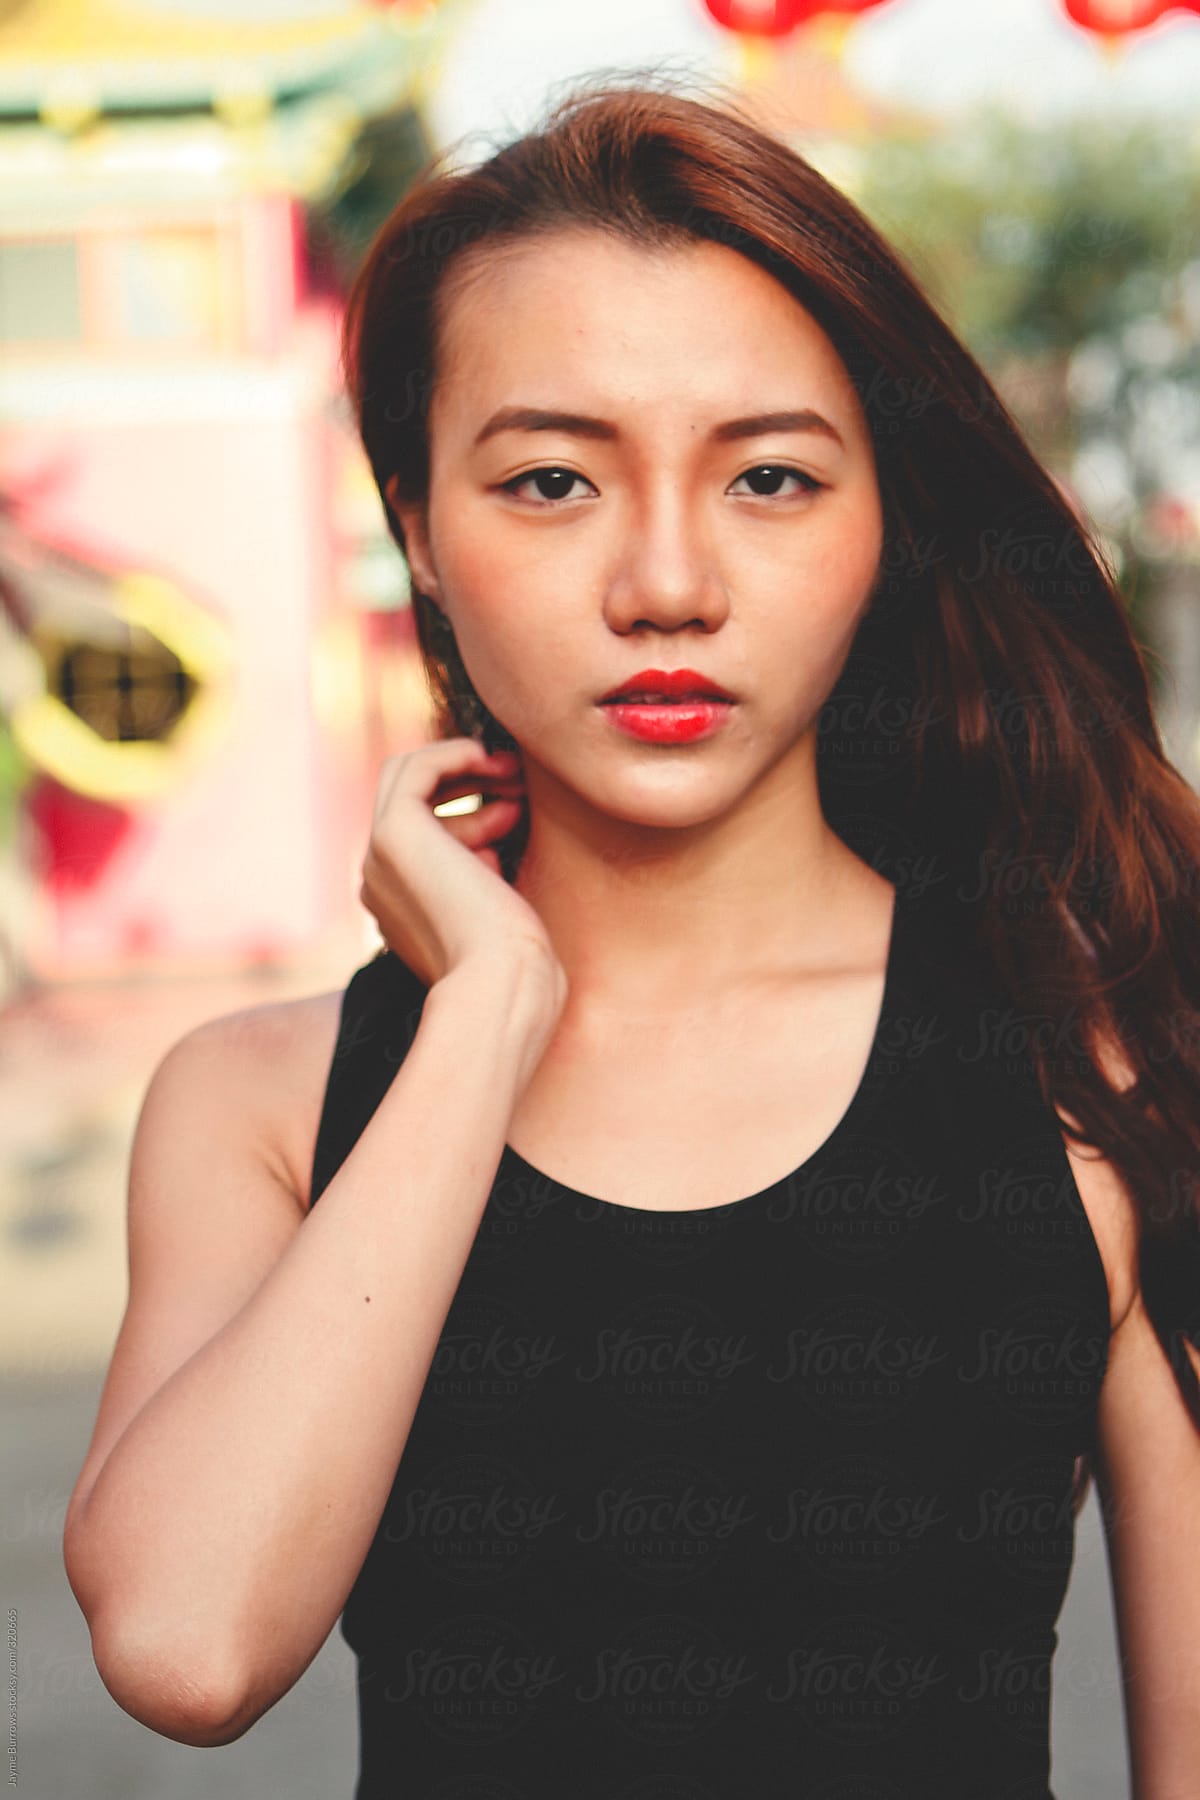 Young Woman In Chinatown By Stocksy Contributor Jayme Burrows Stocksy